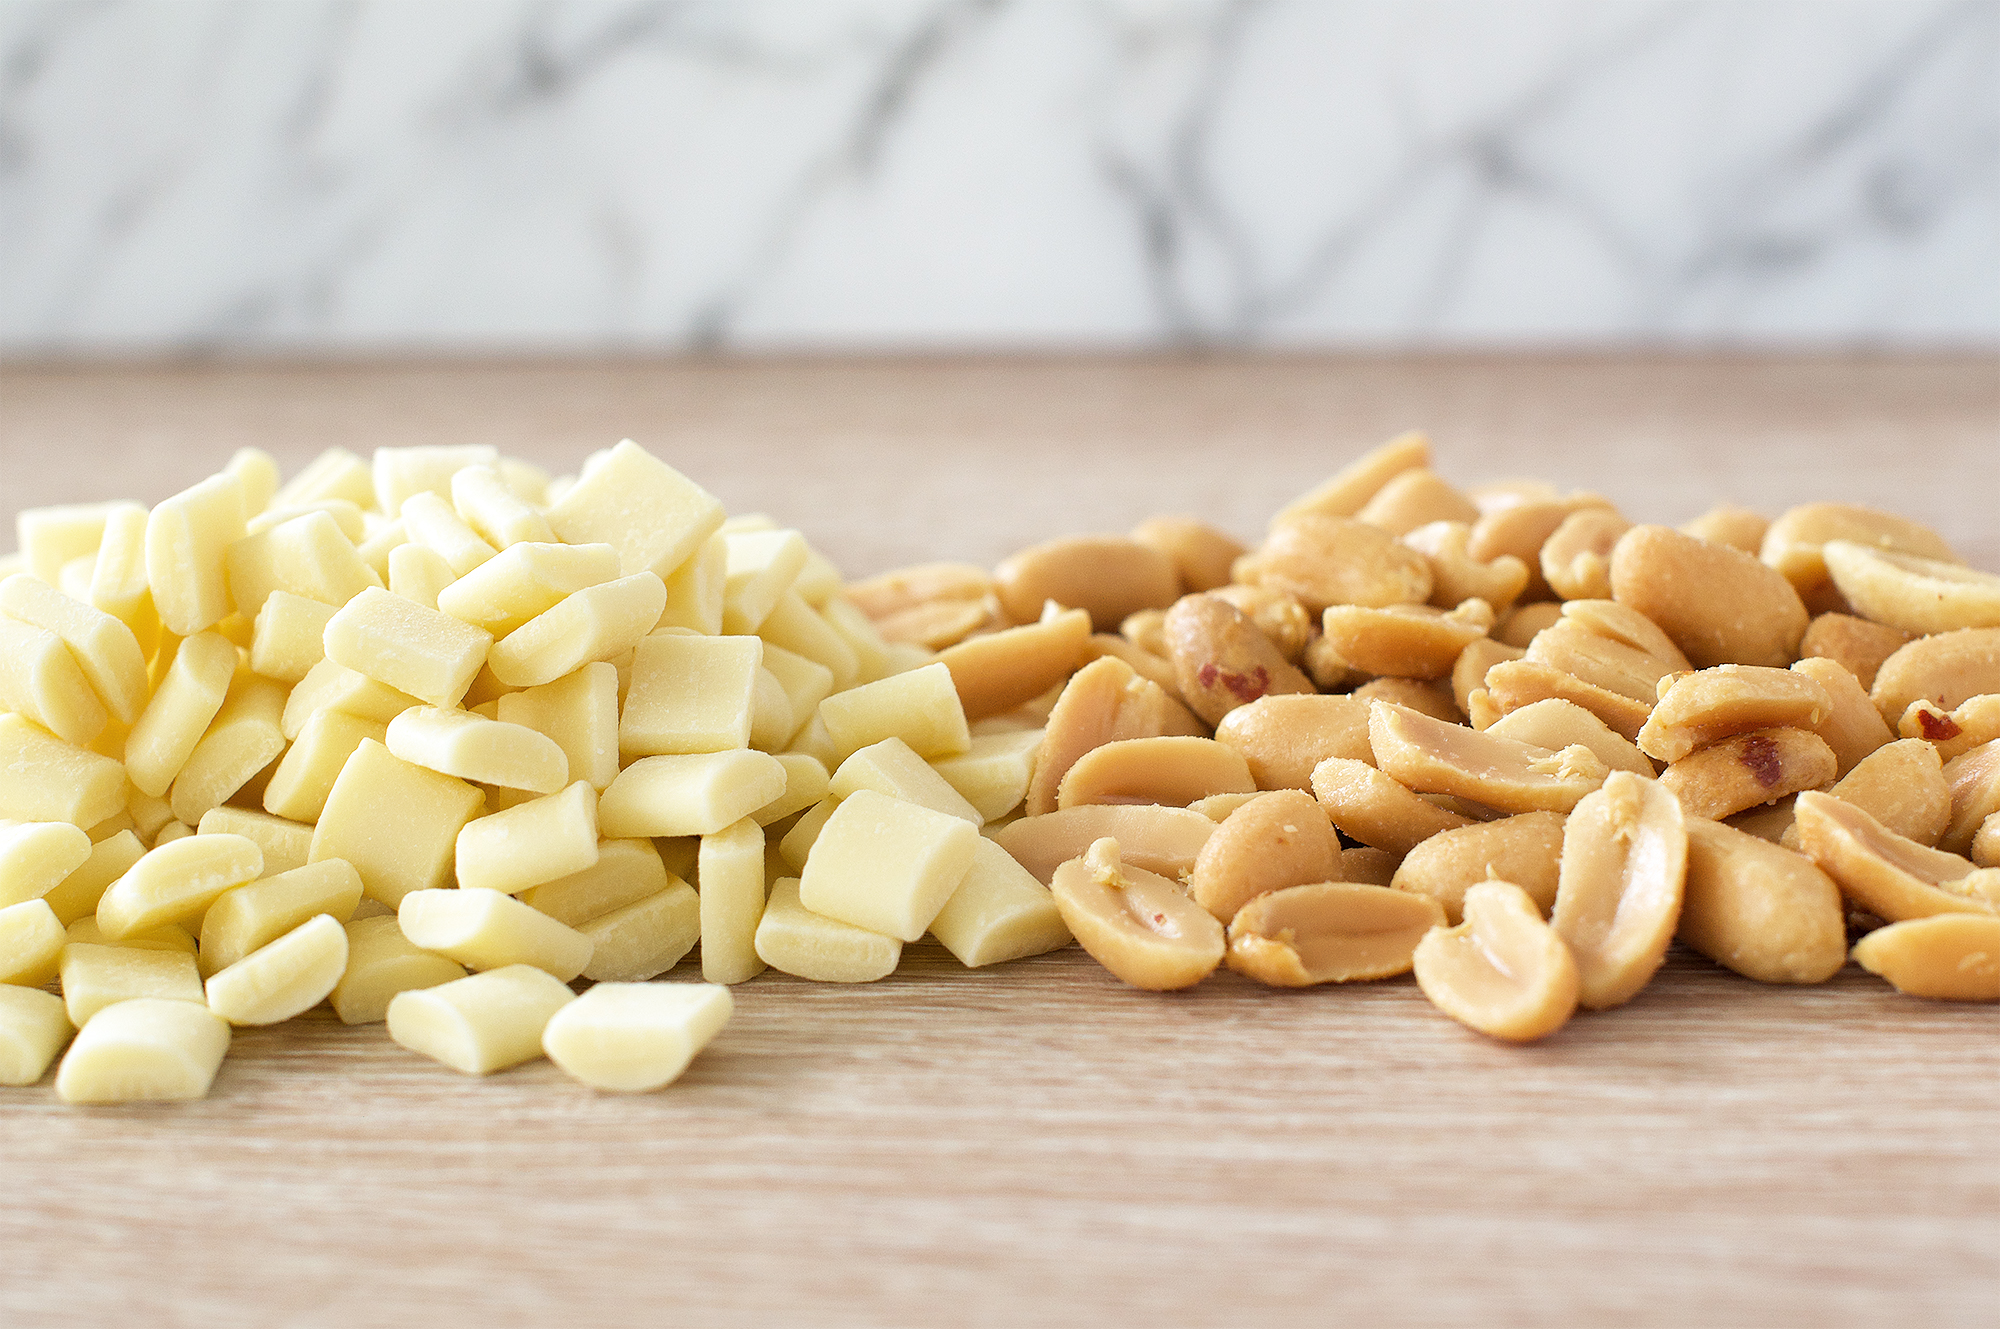 White chocolate chips and salted peanuts